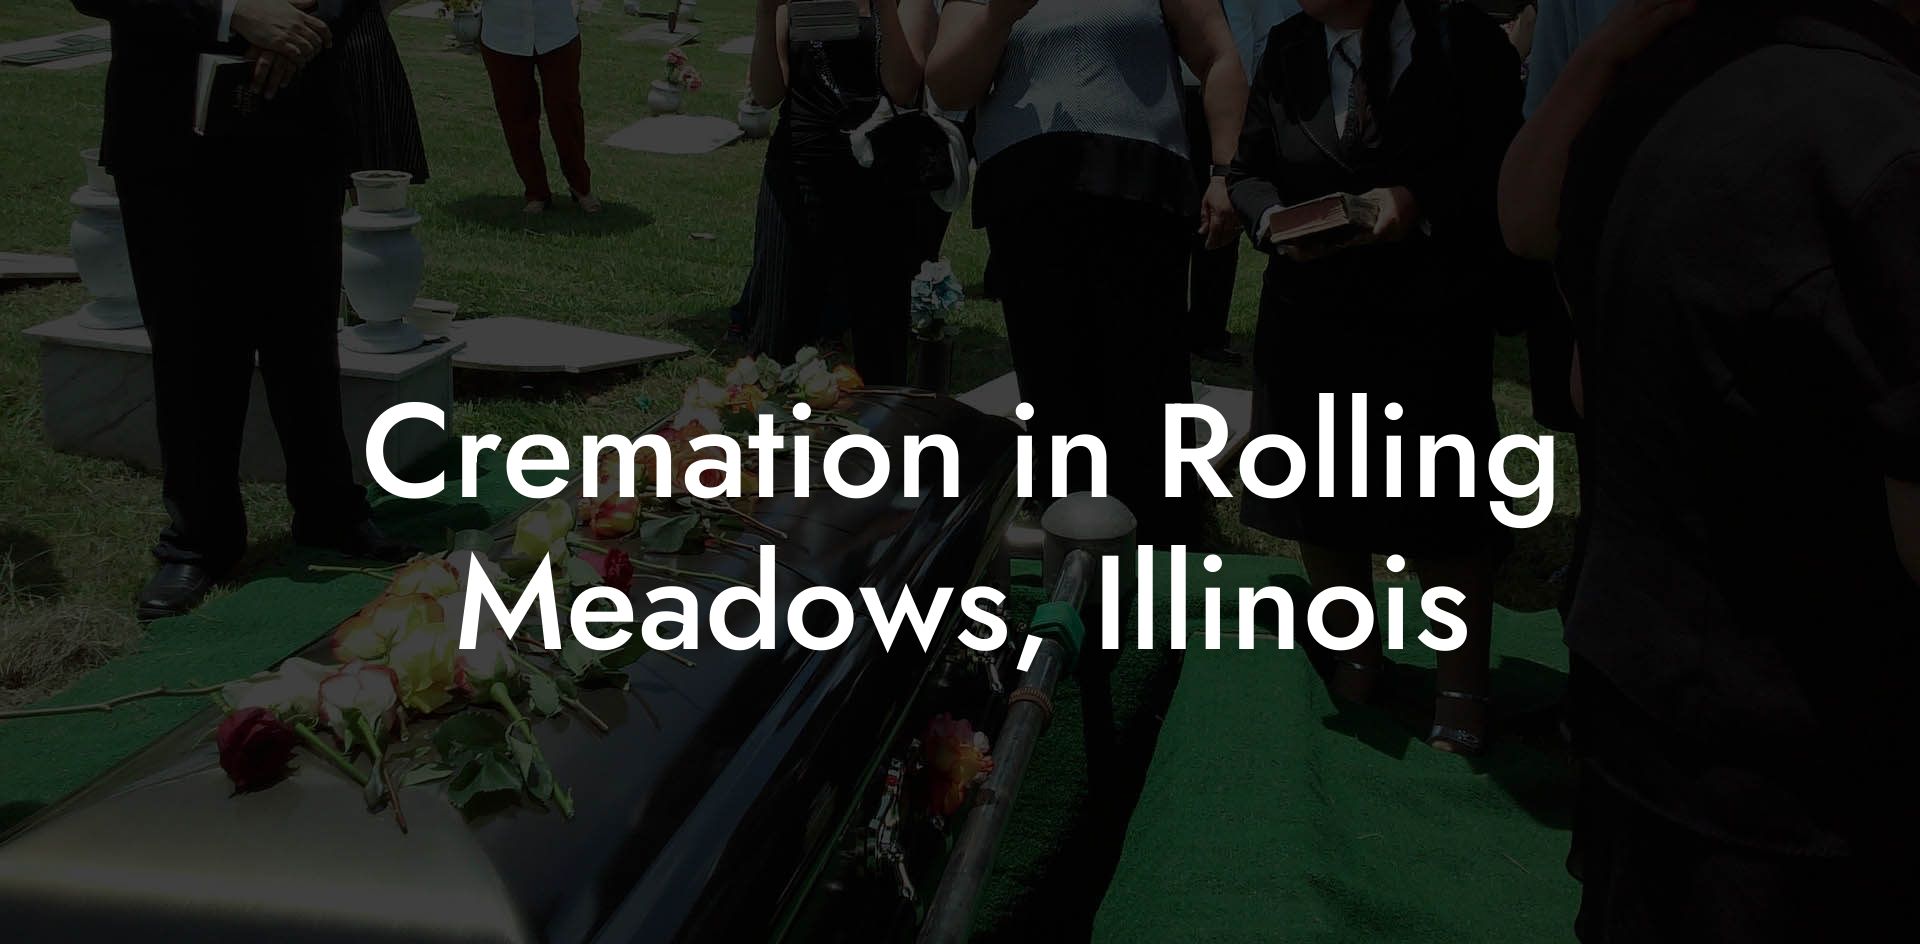 Cremation in Rolling Meadows, Illinois